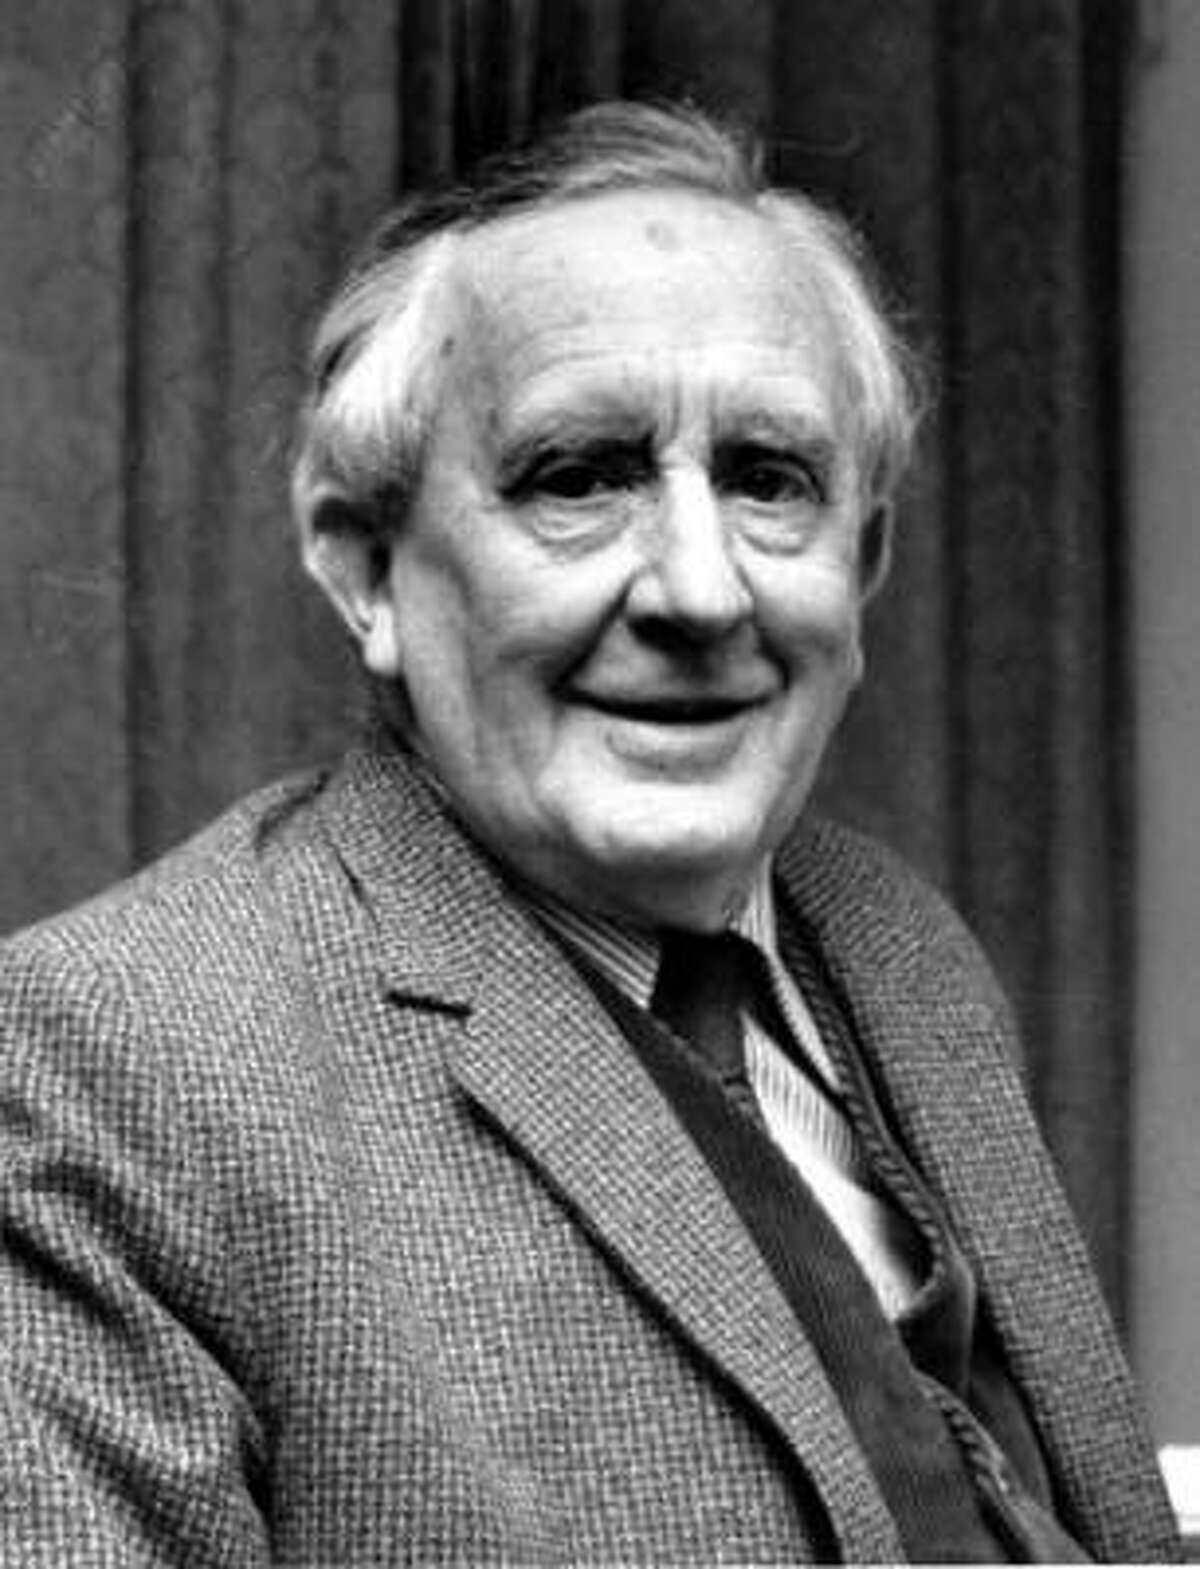 Early life Tolkien and his brother were born in South Africa. While the children and their mother was visiting England, their father died. Tolkien was 3. His mother, who converted to Roman Catholicism, died when he was 12. He was raised by a priest after that.Ronald and his cousins invented their own languages.